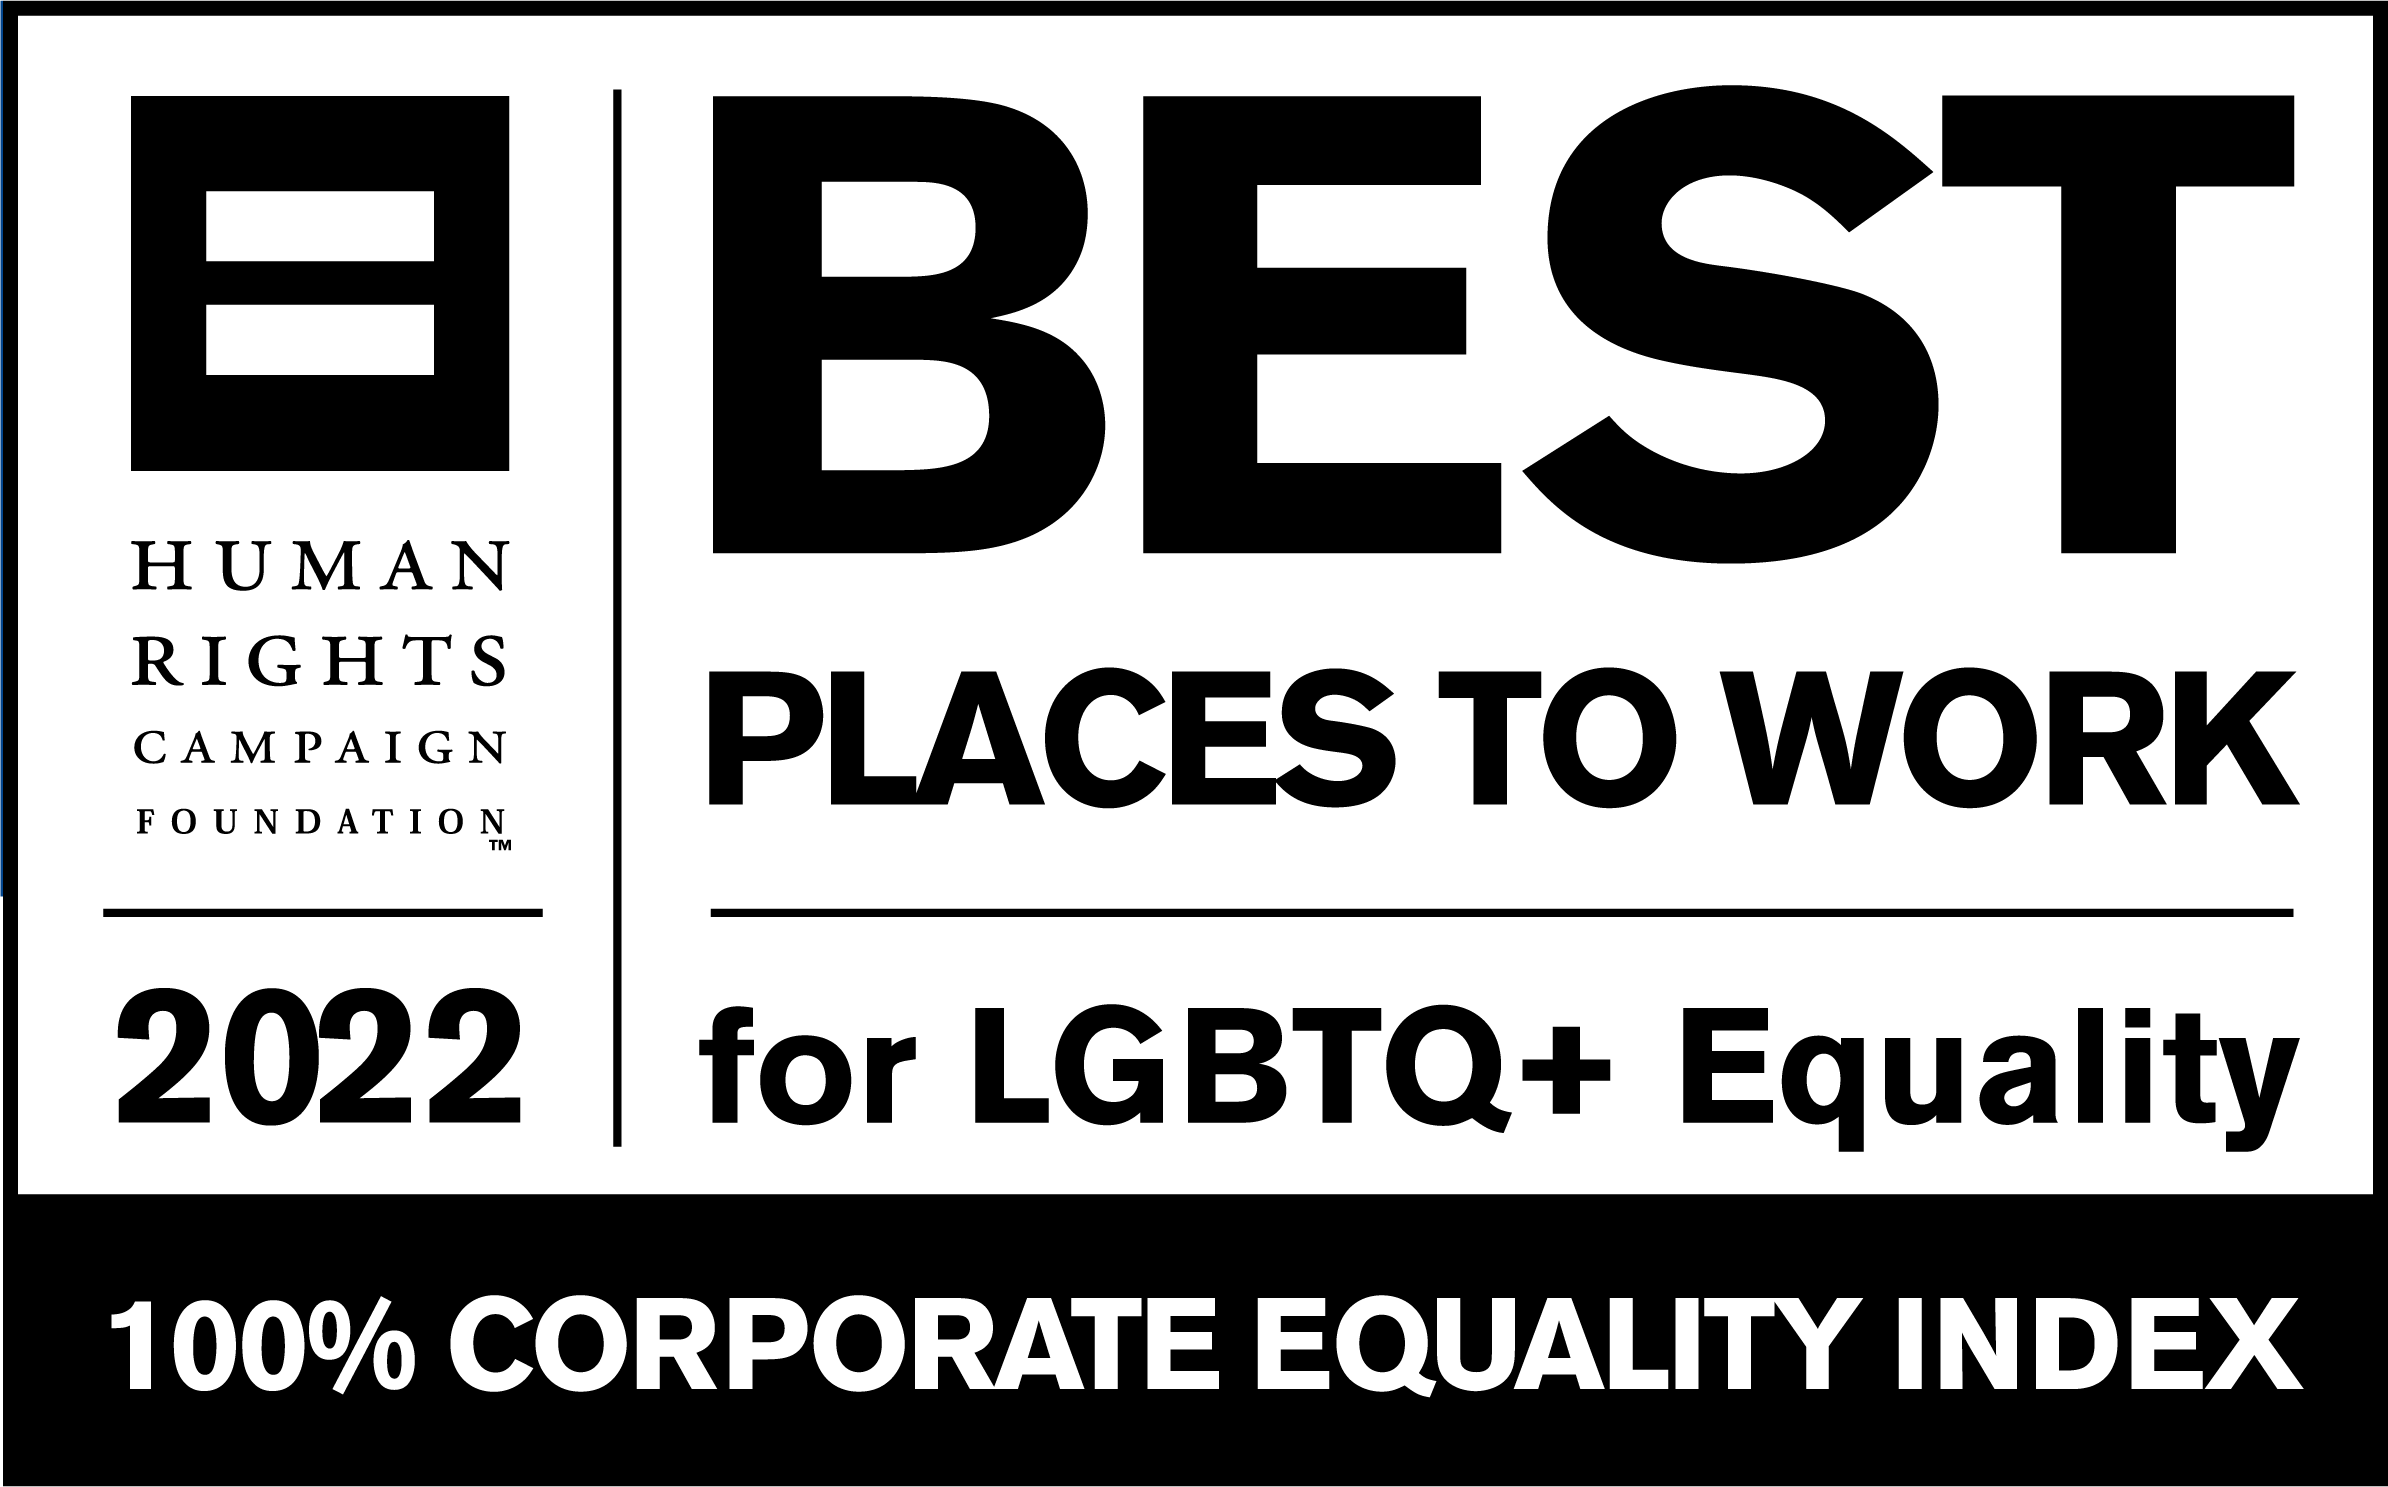 We have been listed on the Human Rights Campaign’s Corporate Equality Index, since 2015